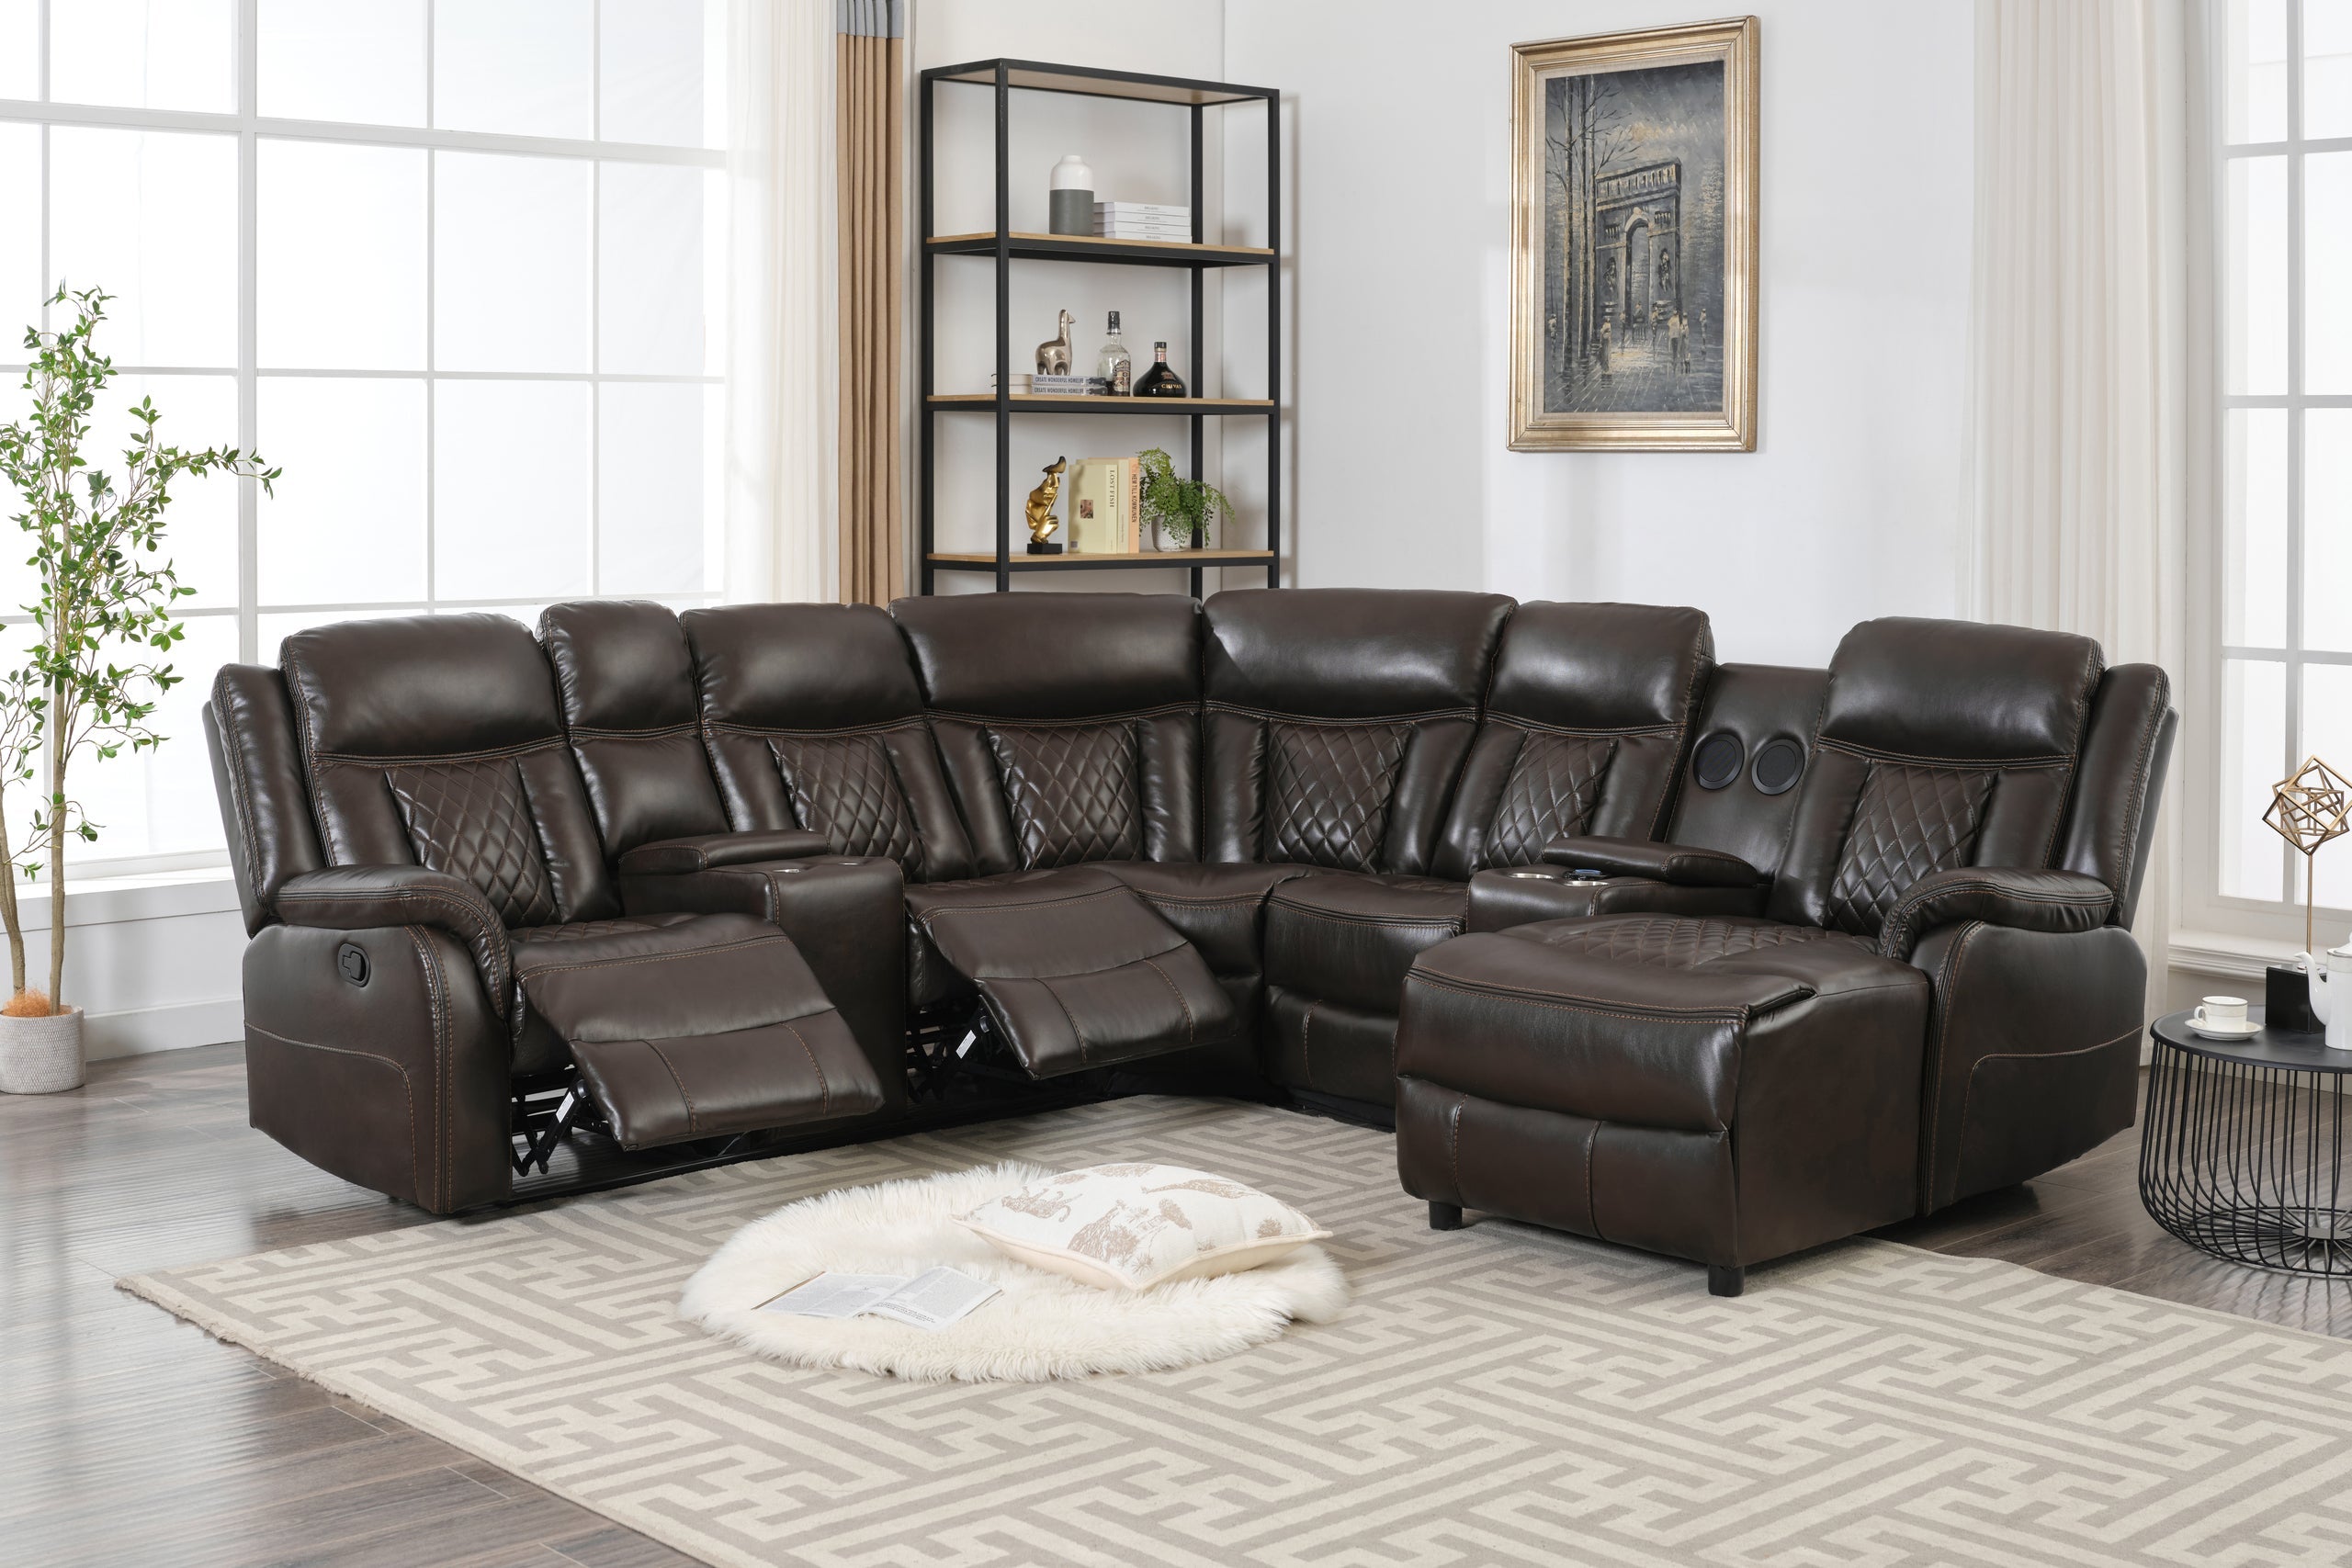 Champion Brown Reclining Sectional